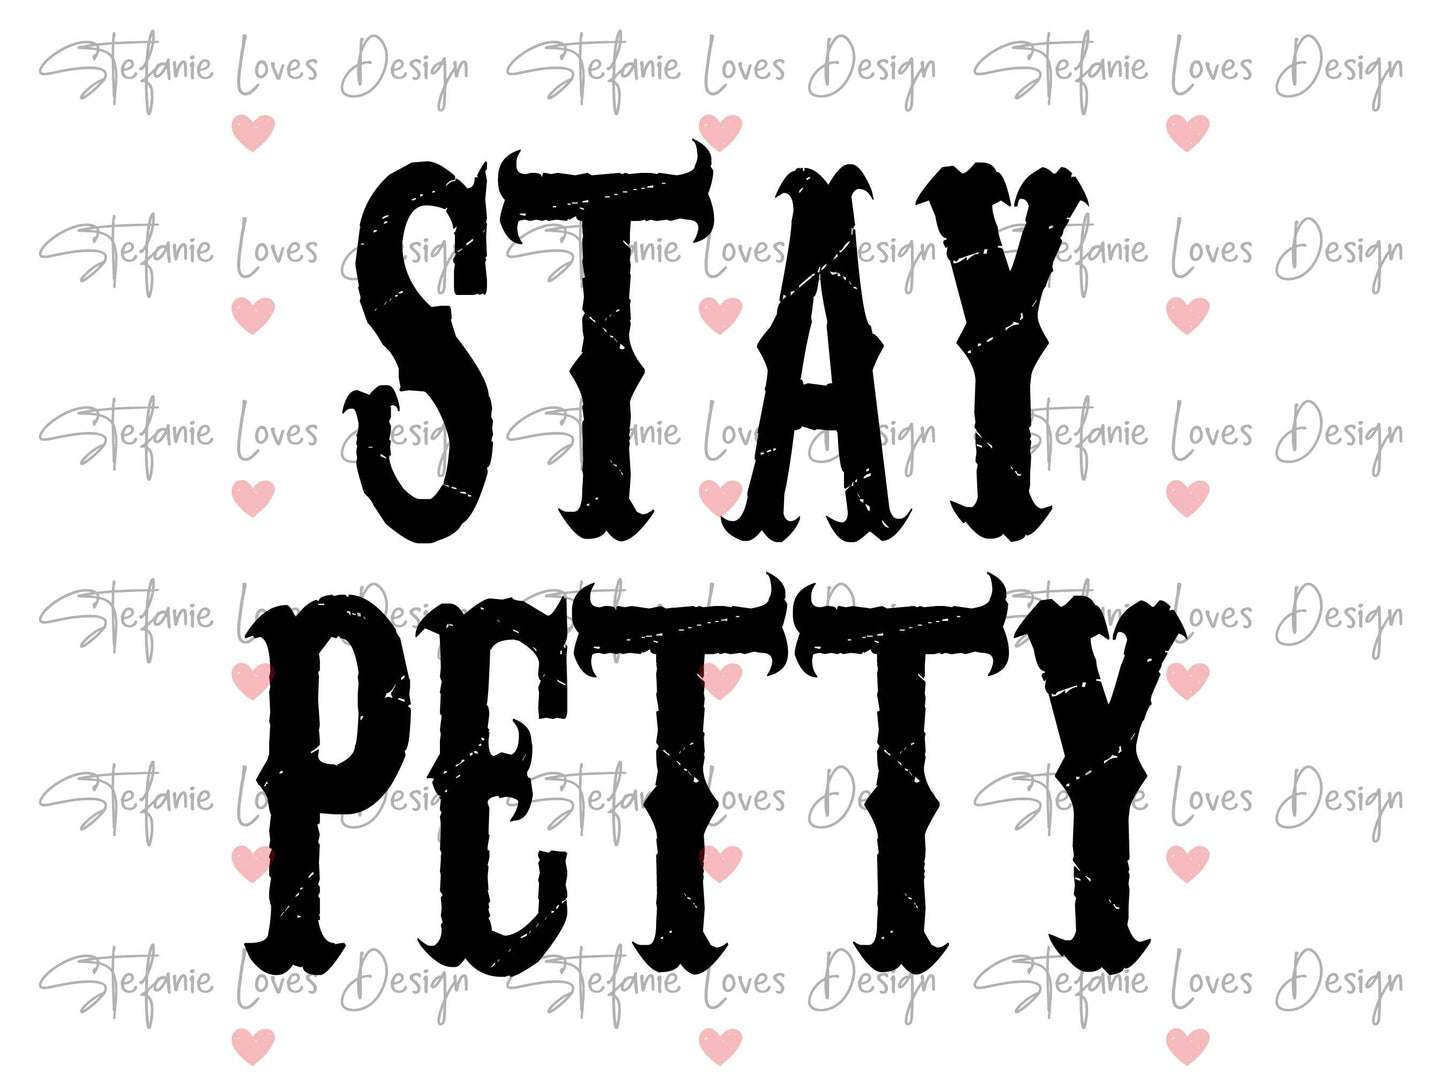 Stay Petty svg, Western svg, Funny Quote Adult humor svg, Funny Adult svg png, Petty svg png, Digital Design